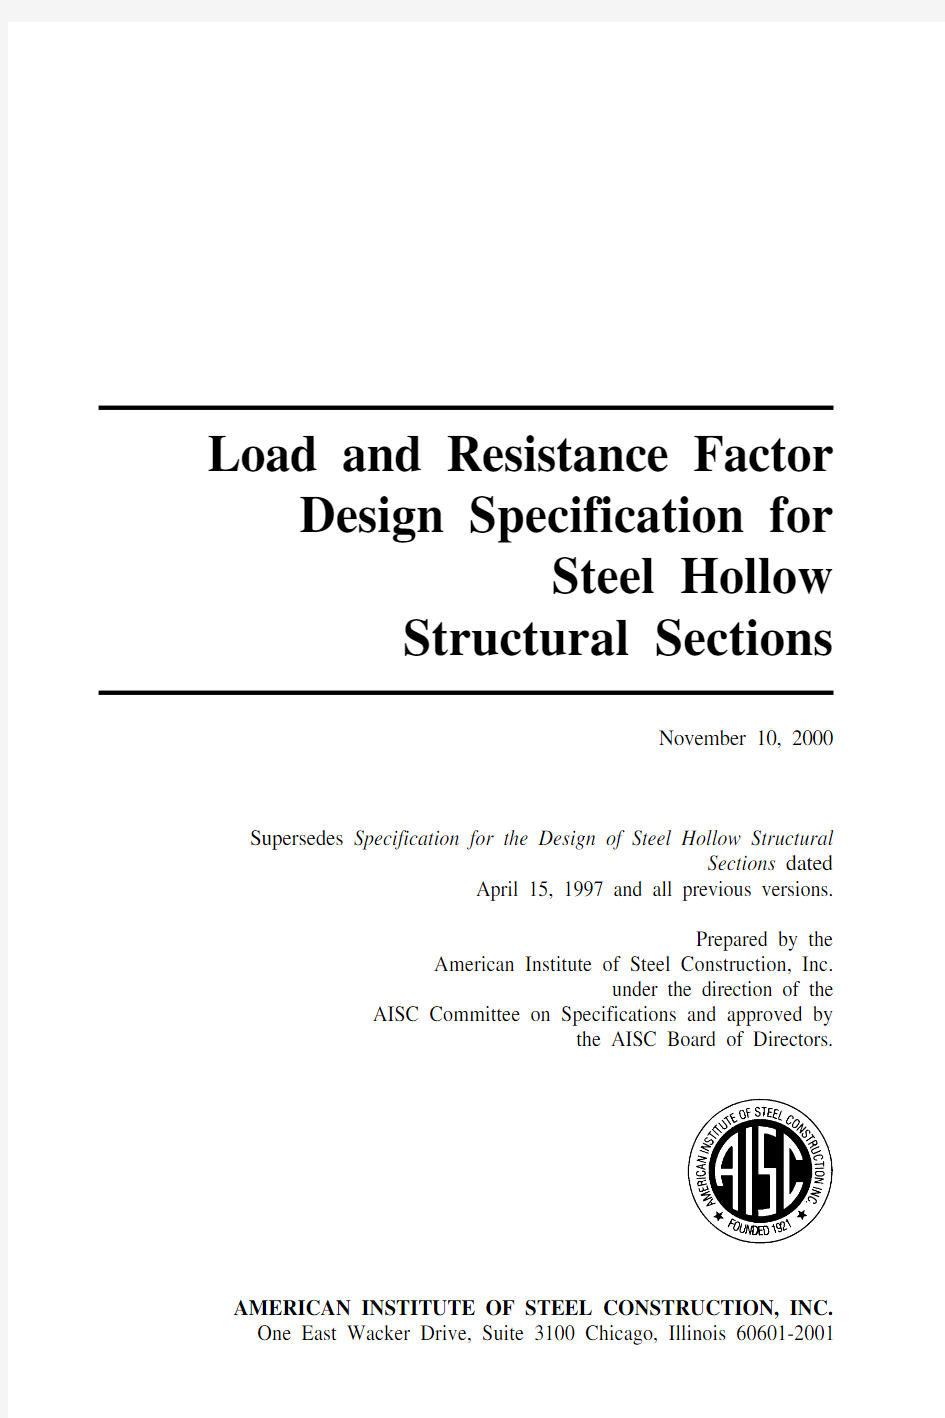 Specification for the Design of Steel Hollow Structural Sections, November 10, 2000